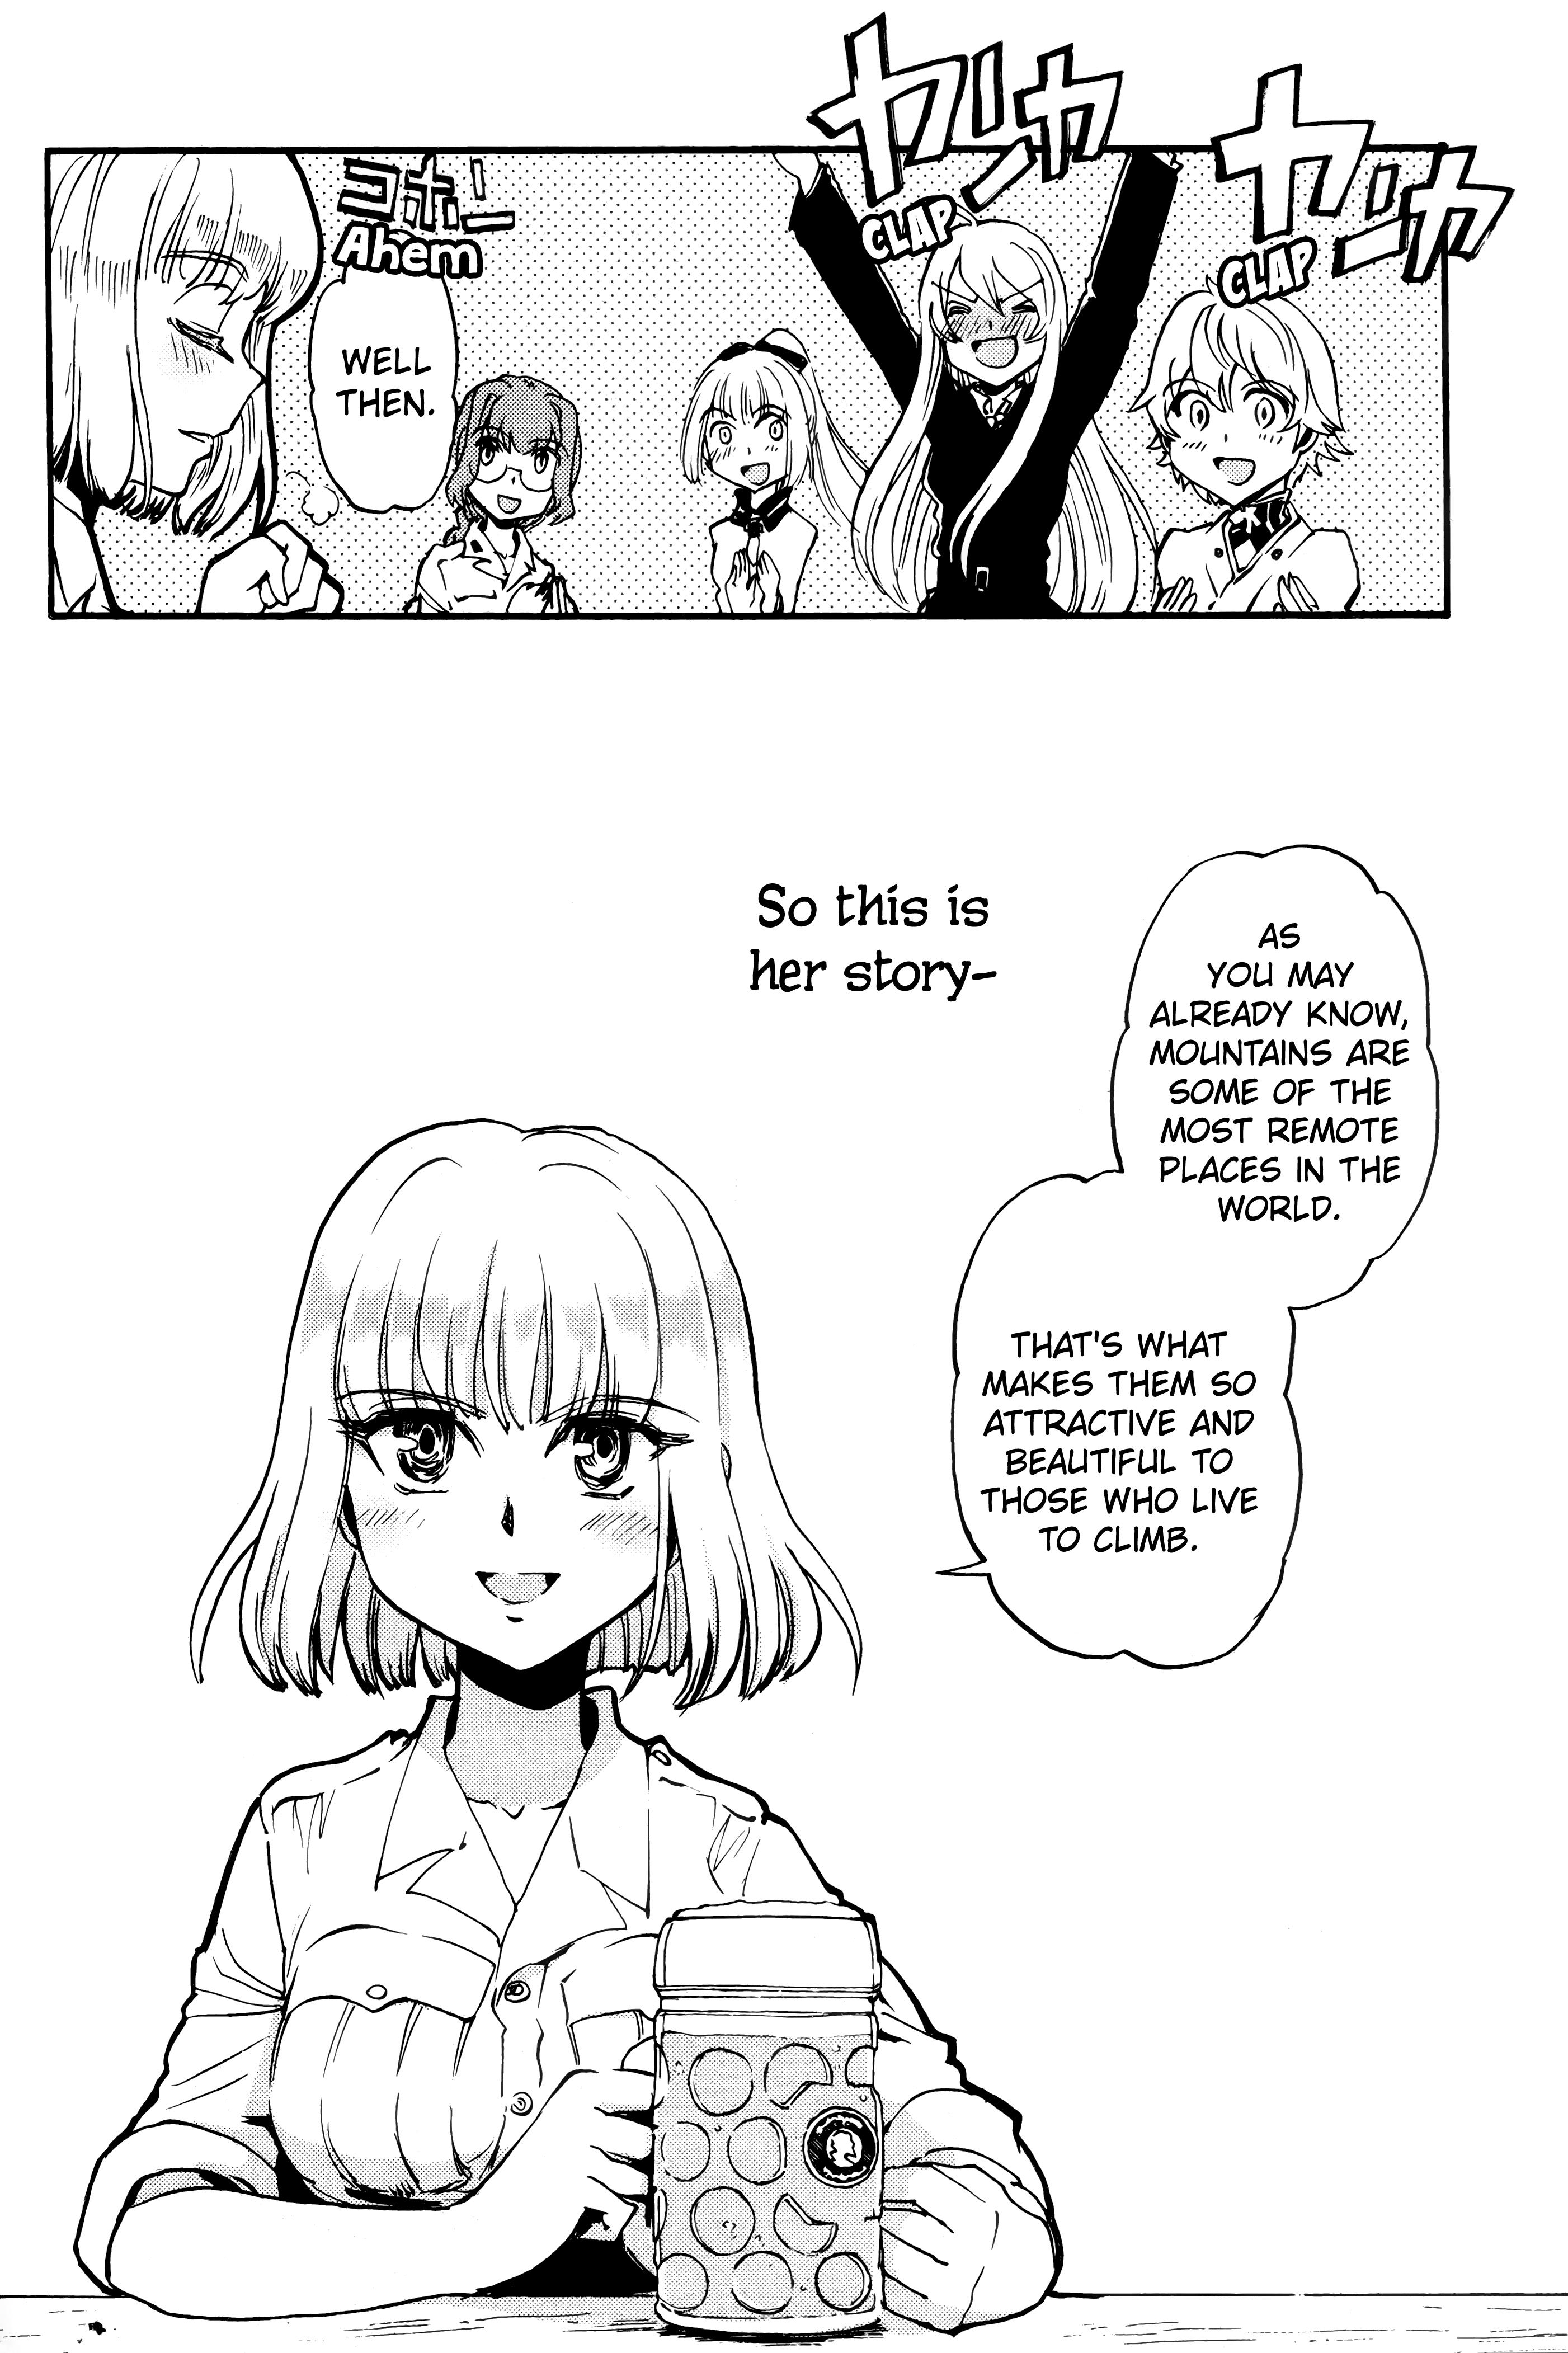 Strike Witches - The Witches Of Andorra - Page 2